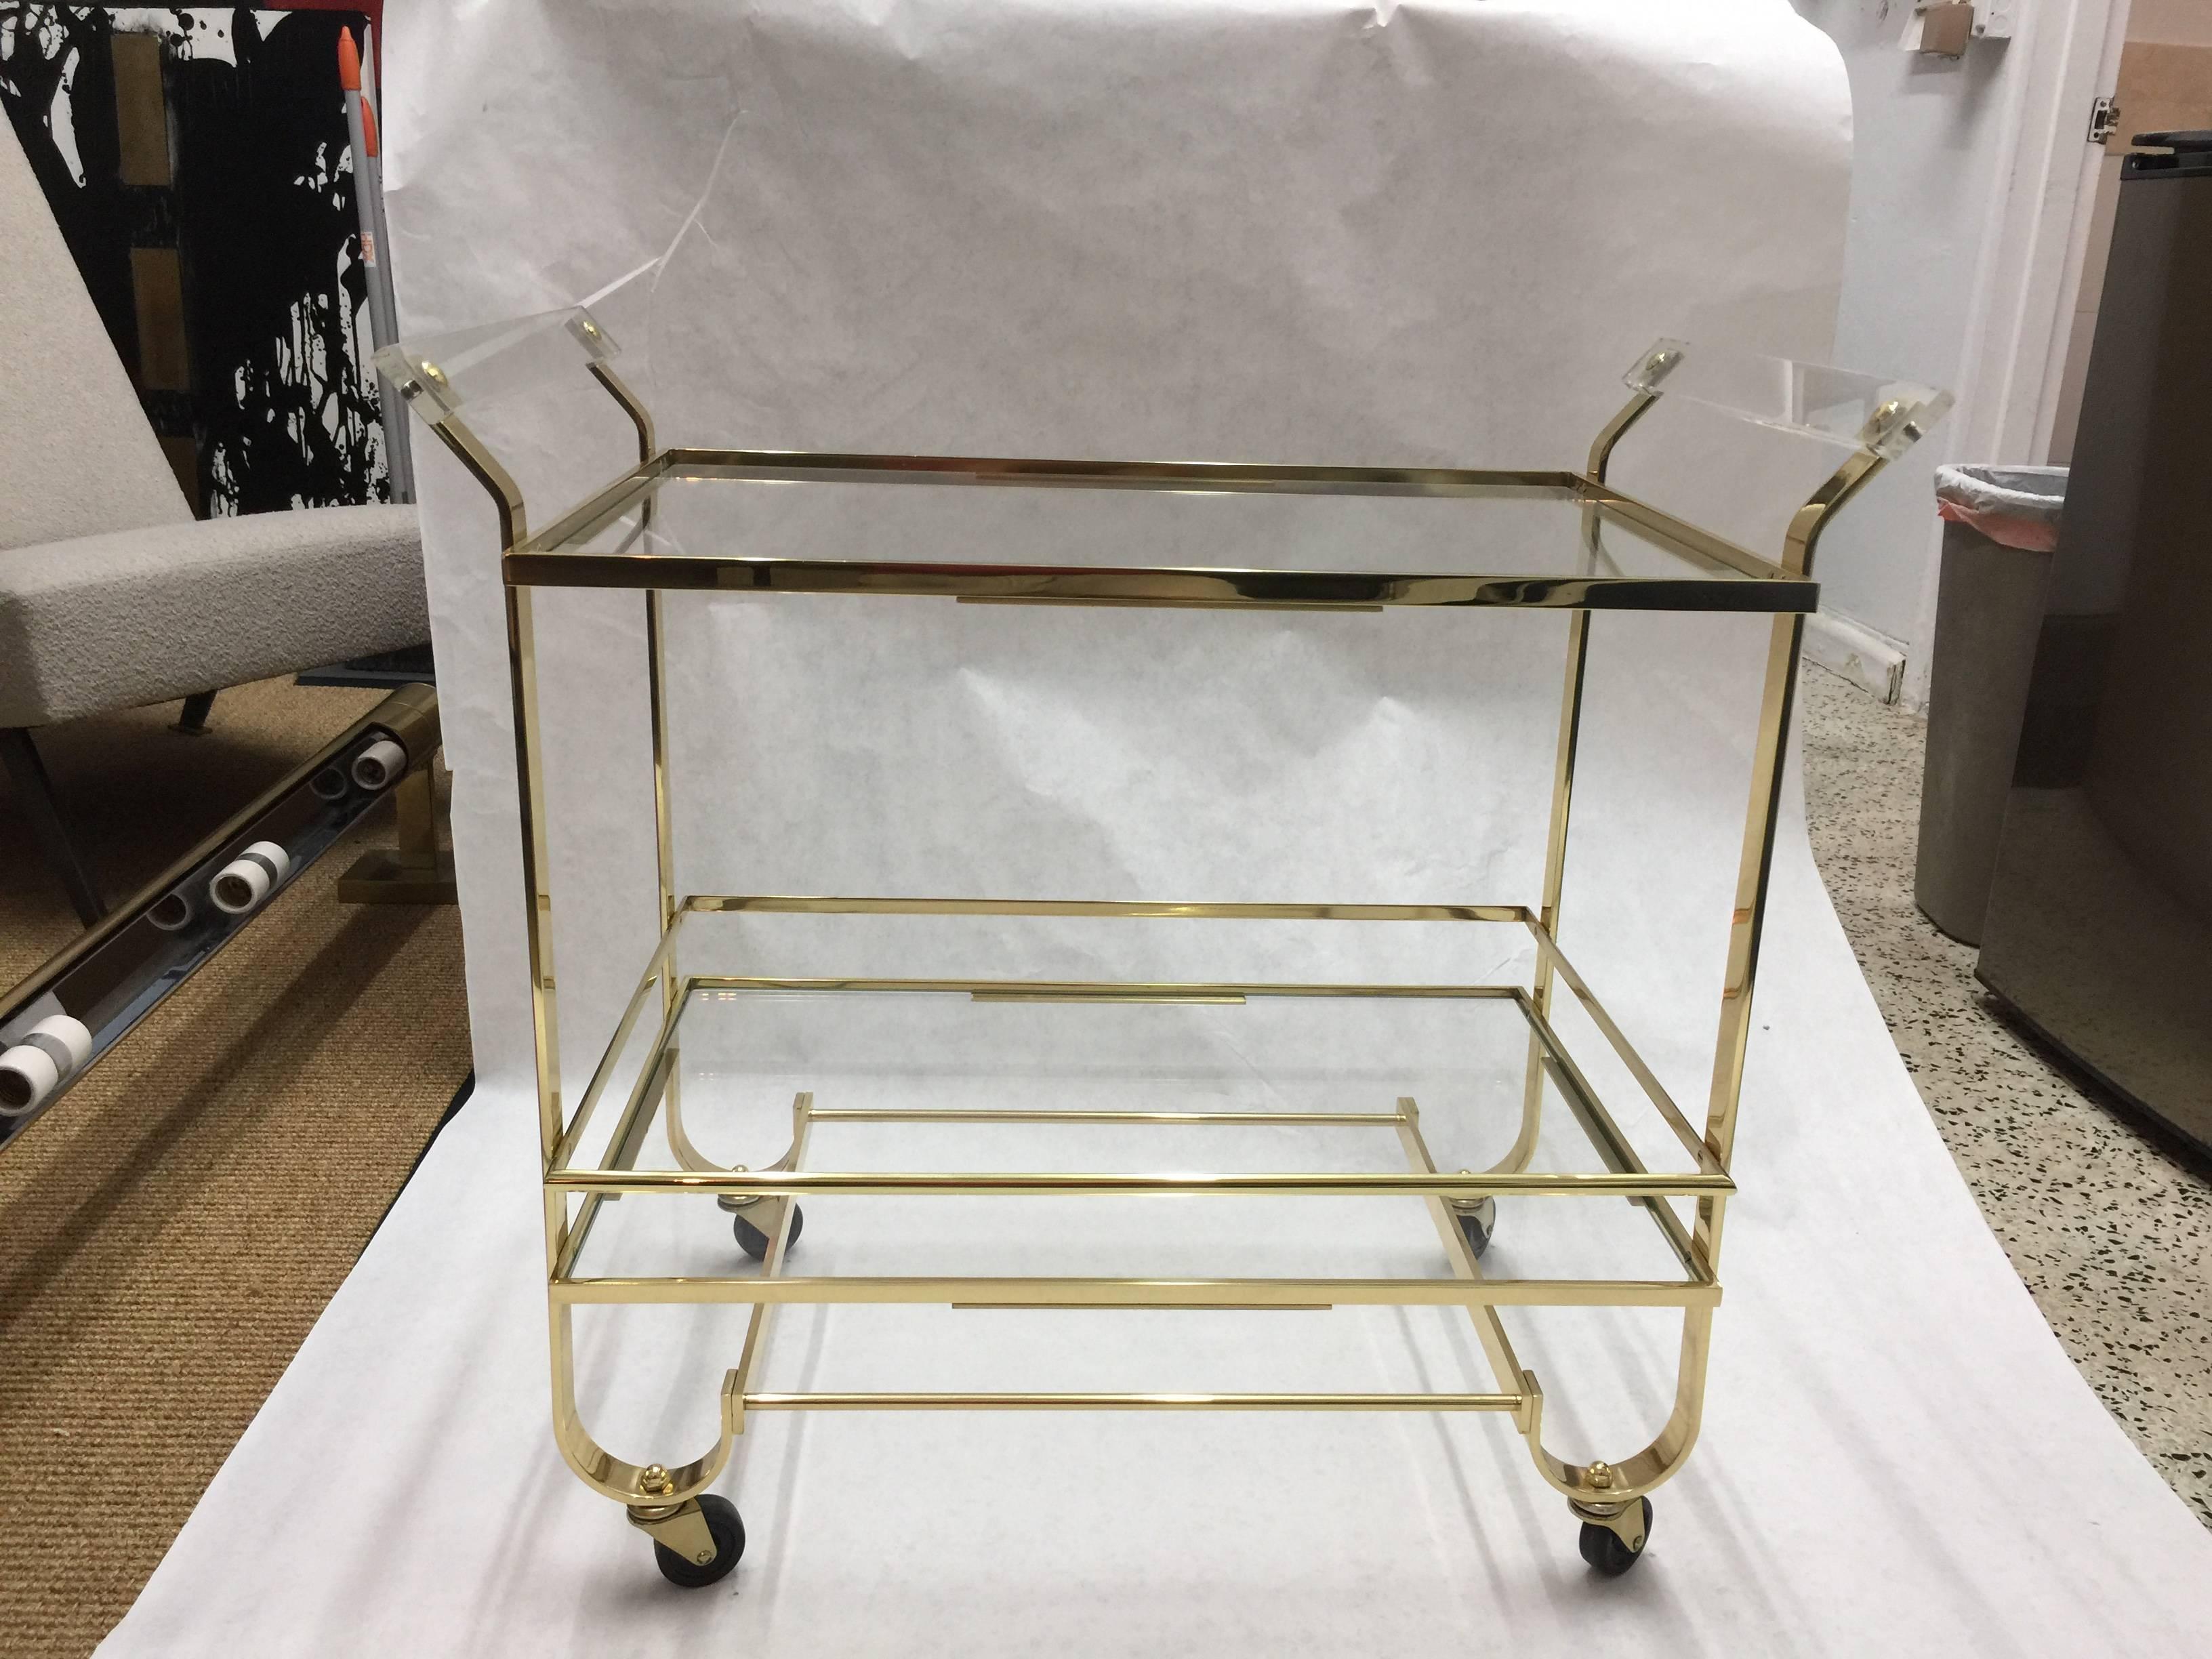 Original vintage Lucite handles and polished brass bar cart. Two-tiers of glass shelves this cart is on casters for easy rolling.